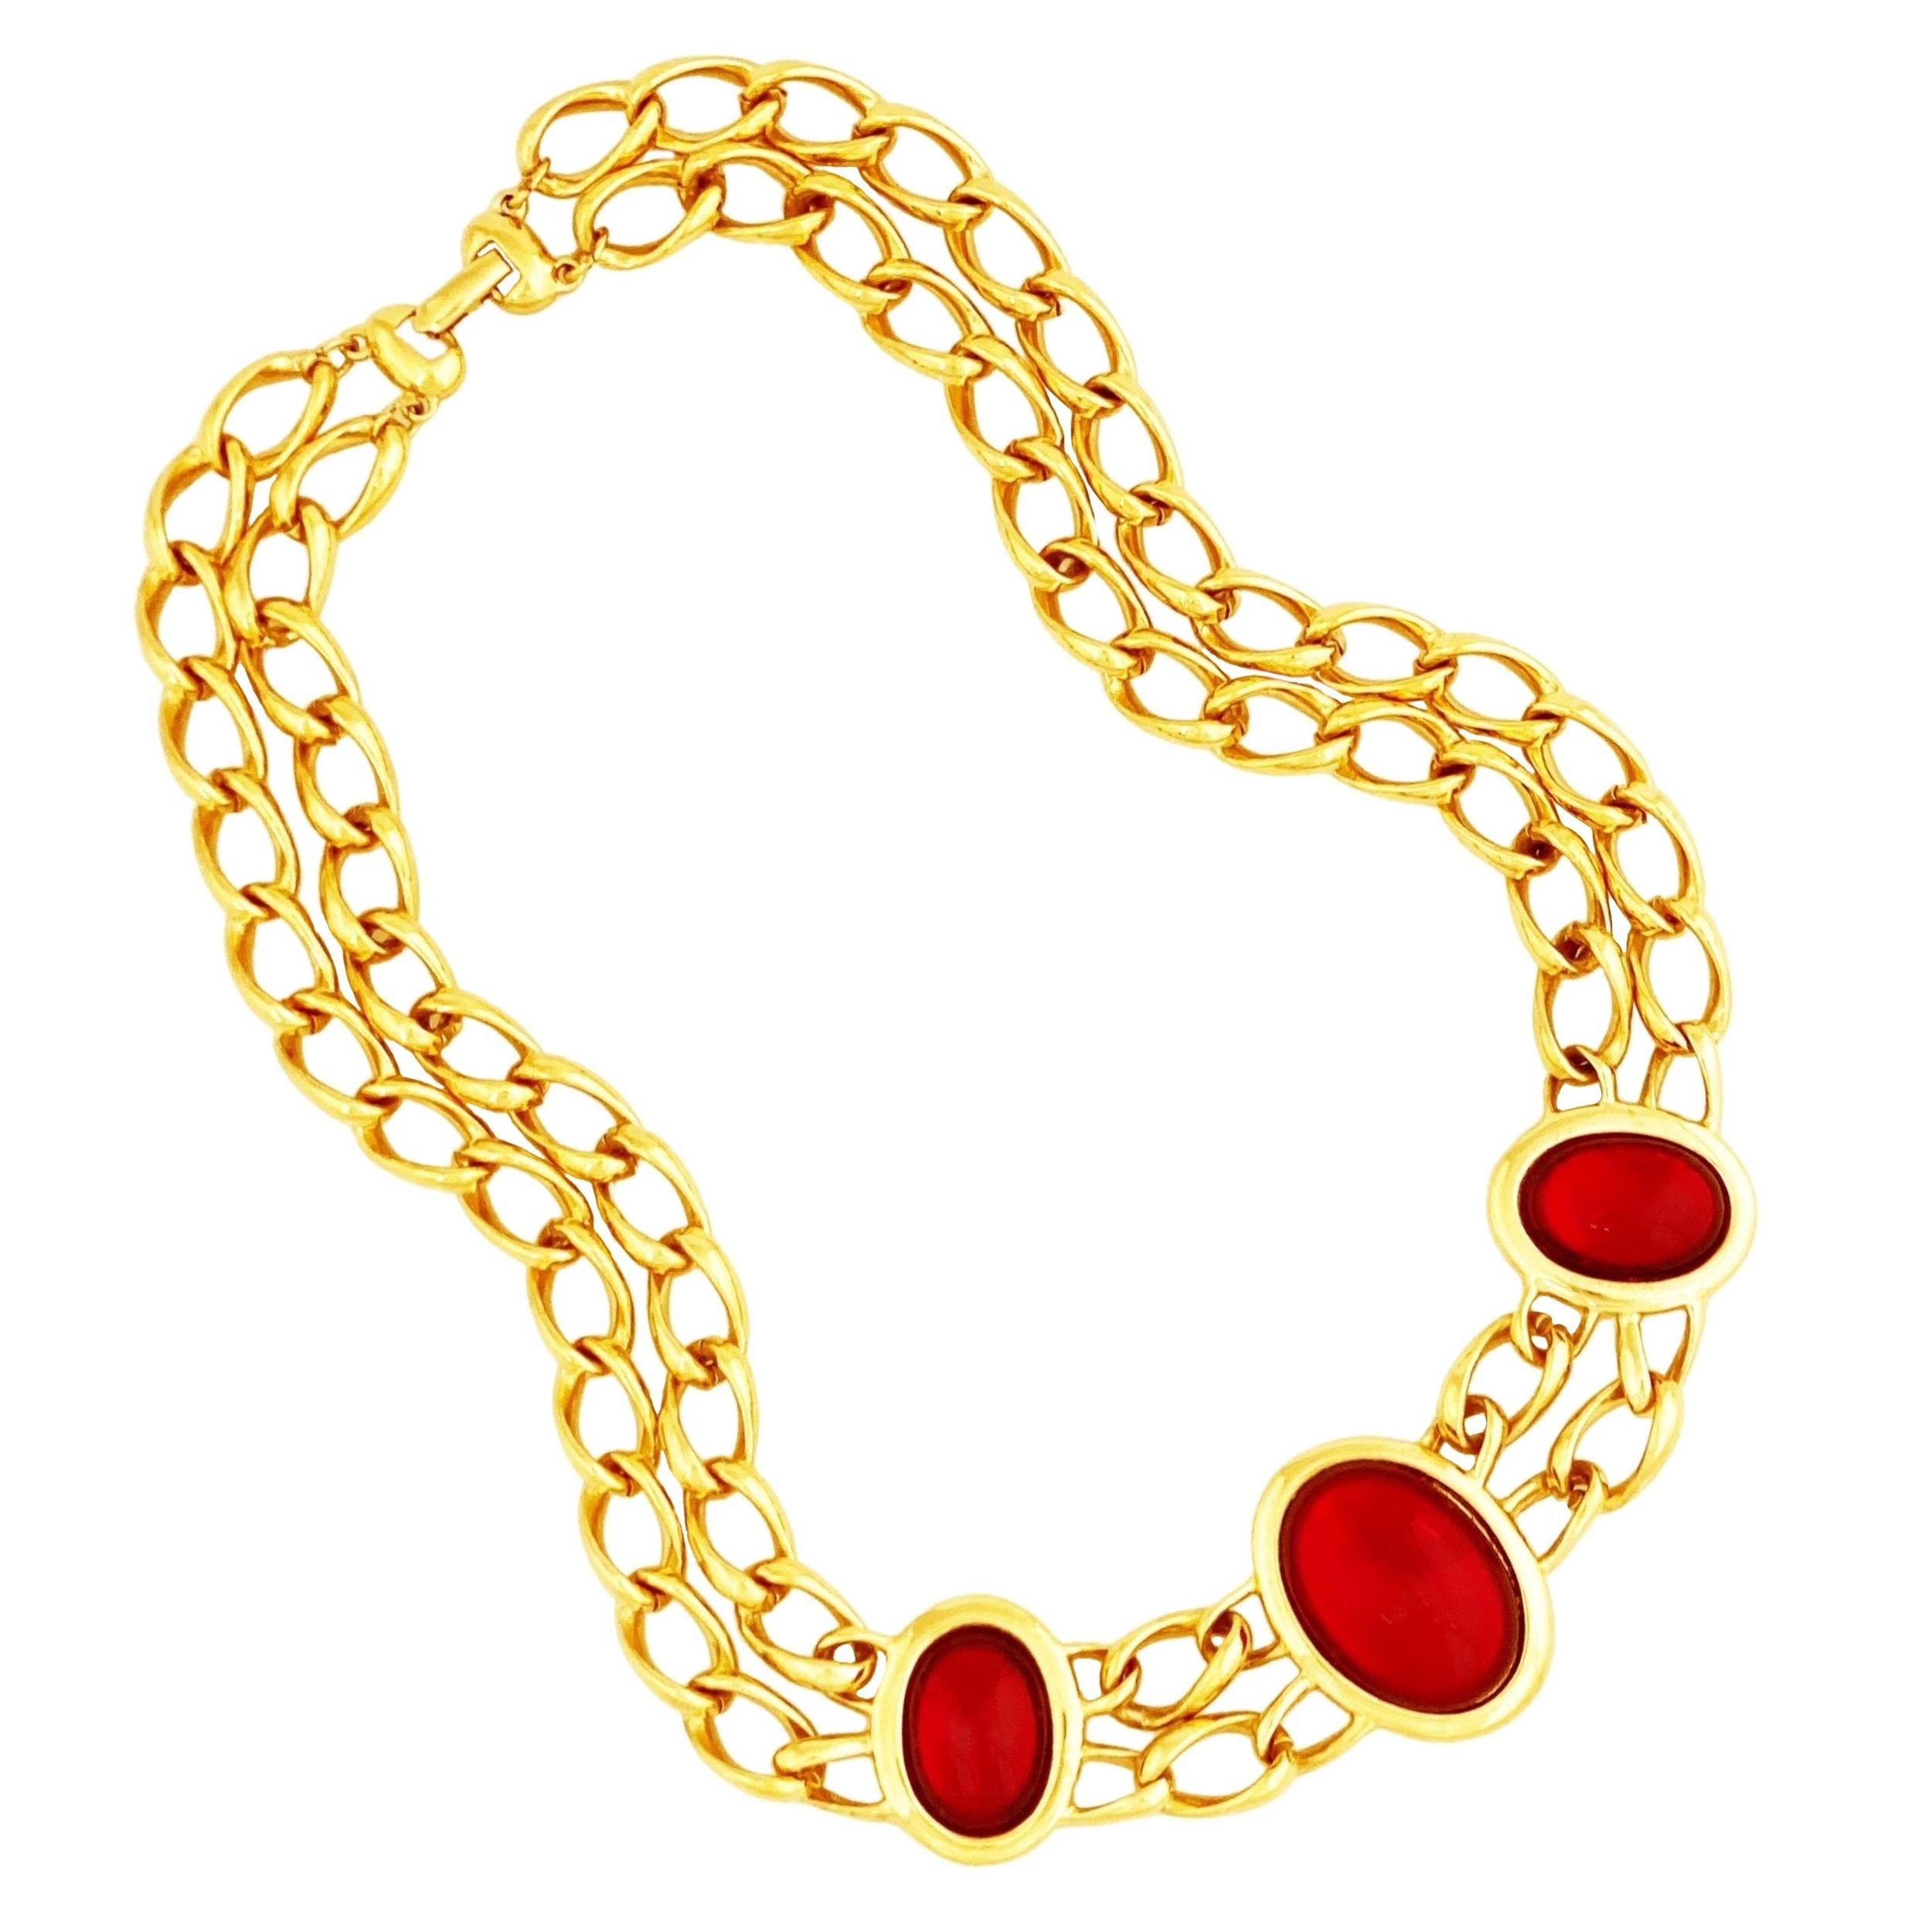 Ruby Red Glass Cabochon and Double Chain "Milano Collection" Necklace by Napier